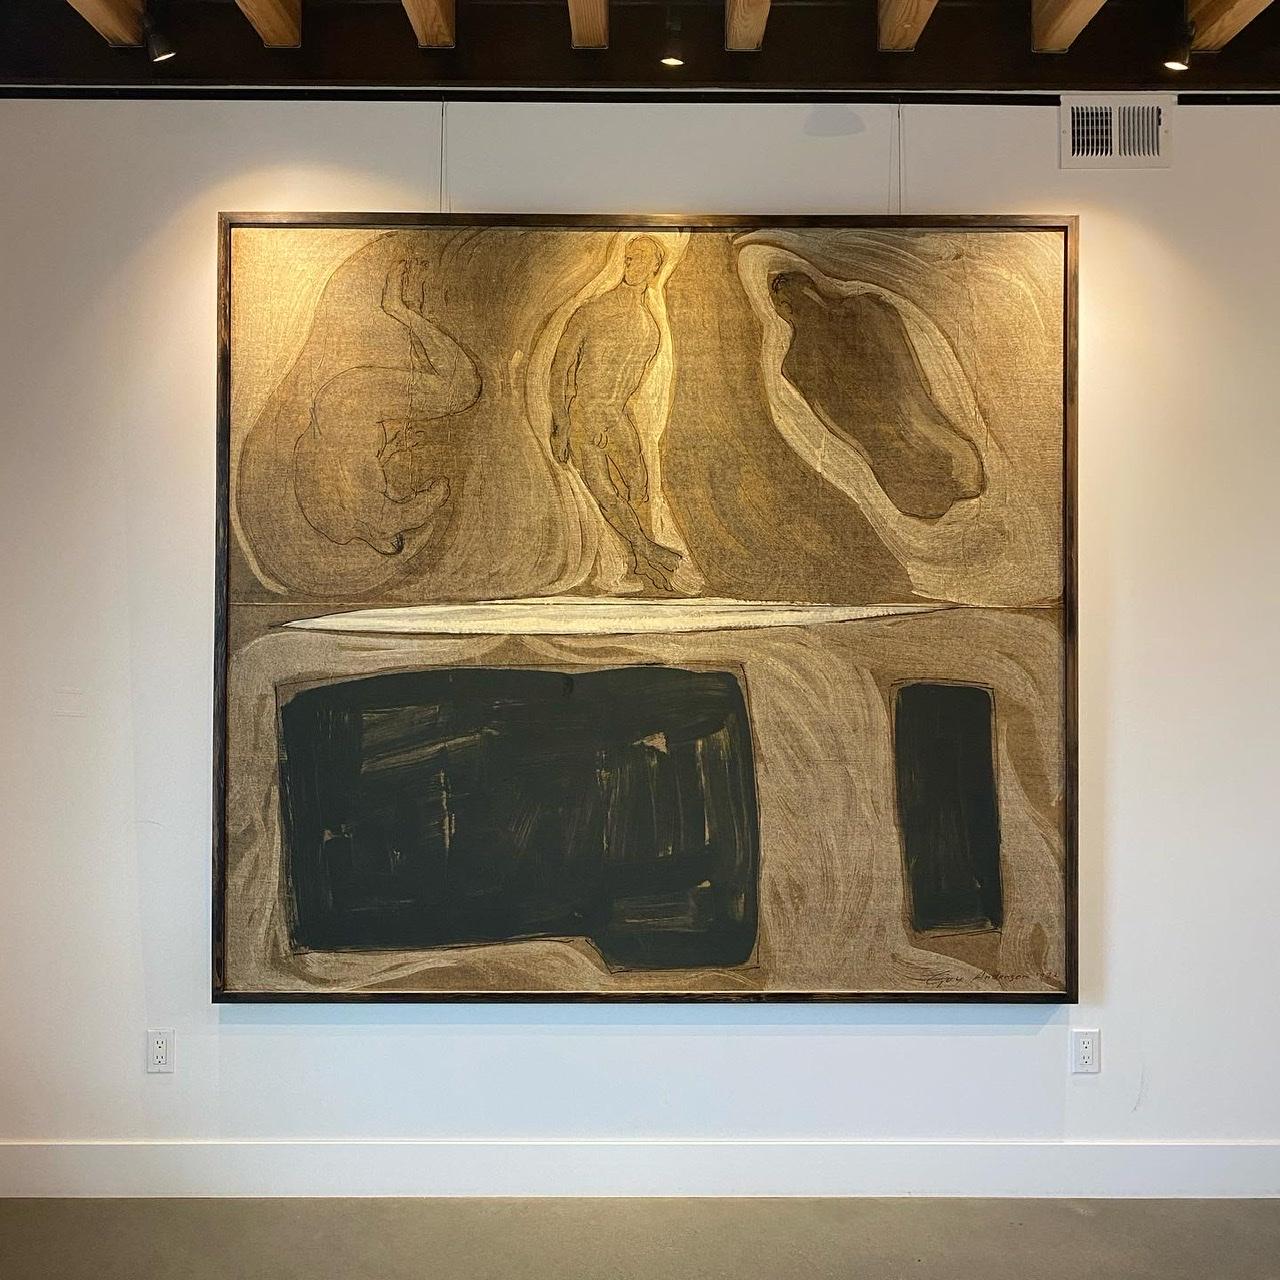 Abstract Figuration by Guy Anderson in his signature style. Painted with thinned oils on brown roofing paper. Mounted to wood and framed by artist. Signed twice and dated 1972.

Guy Anderson (November 20, 1906 – April 30, 1998) was an American